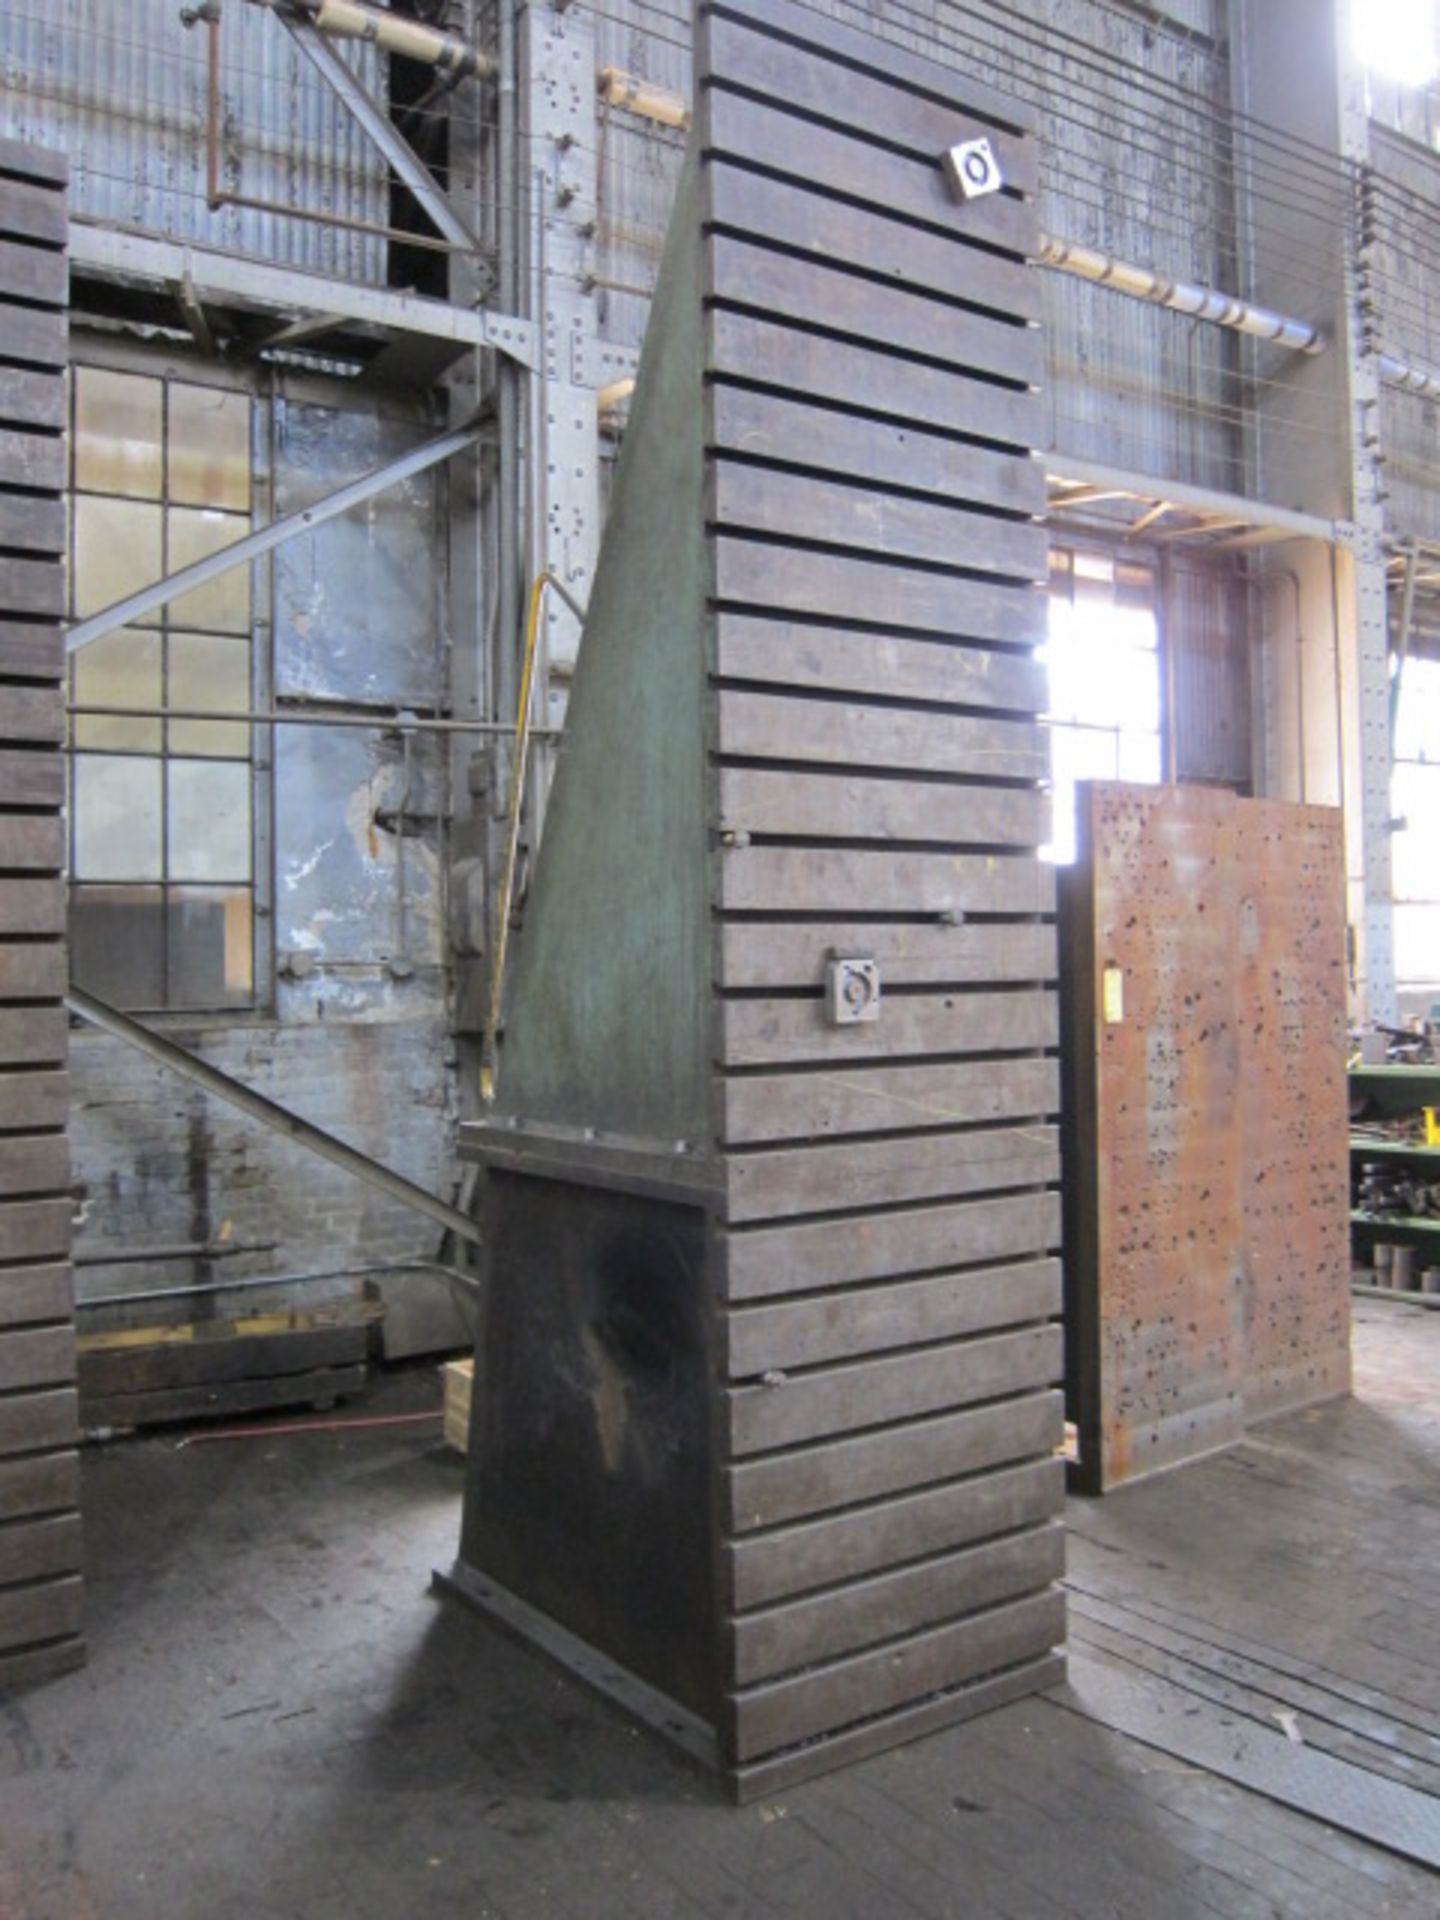 LOT OF FABRICATED STEEL T-SLOTTED ANGLE PLATES, 36"W. base section x 58' dp. x 96" ht. upper section - Image 2 of 2